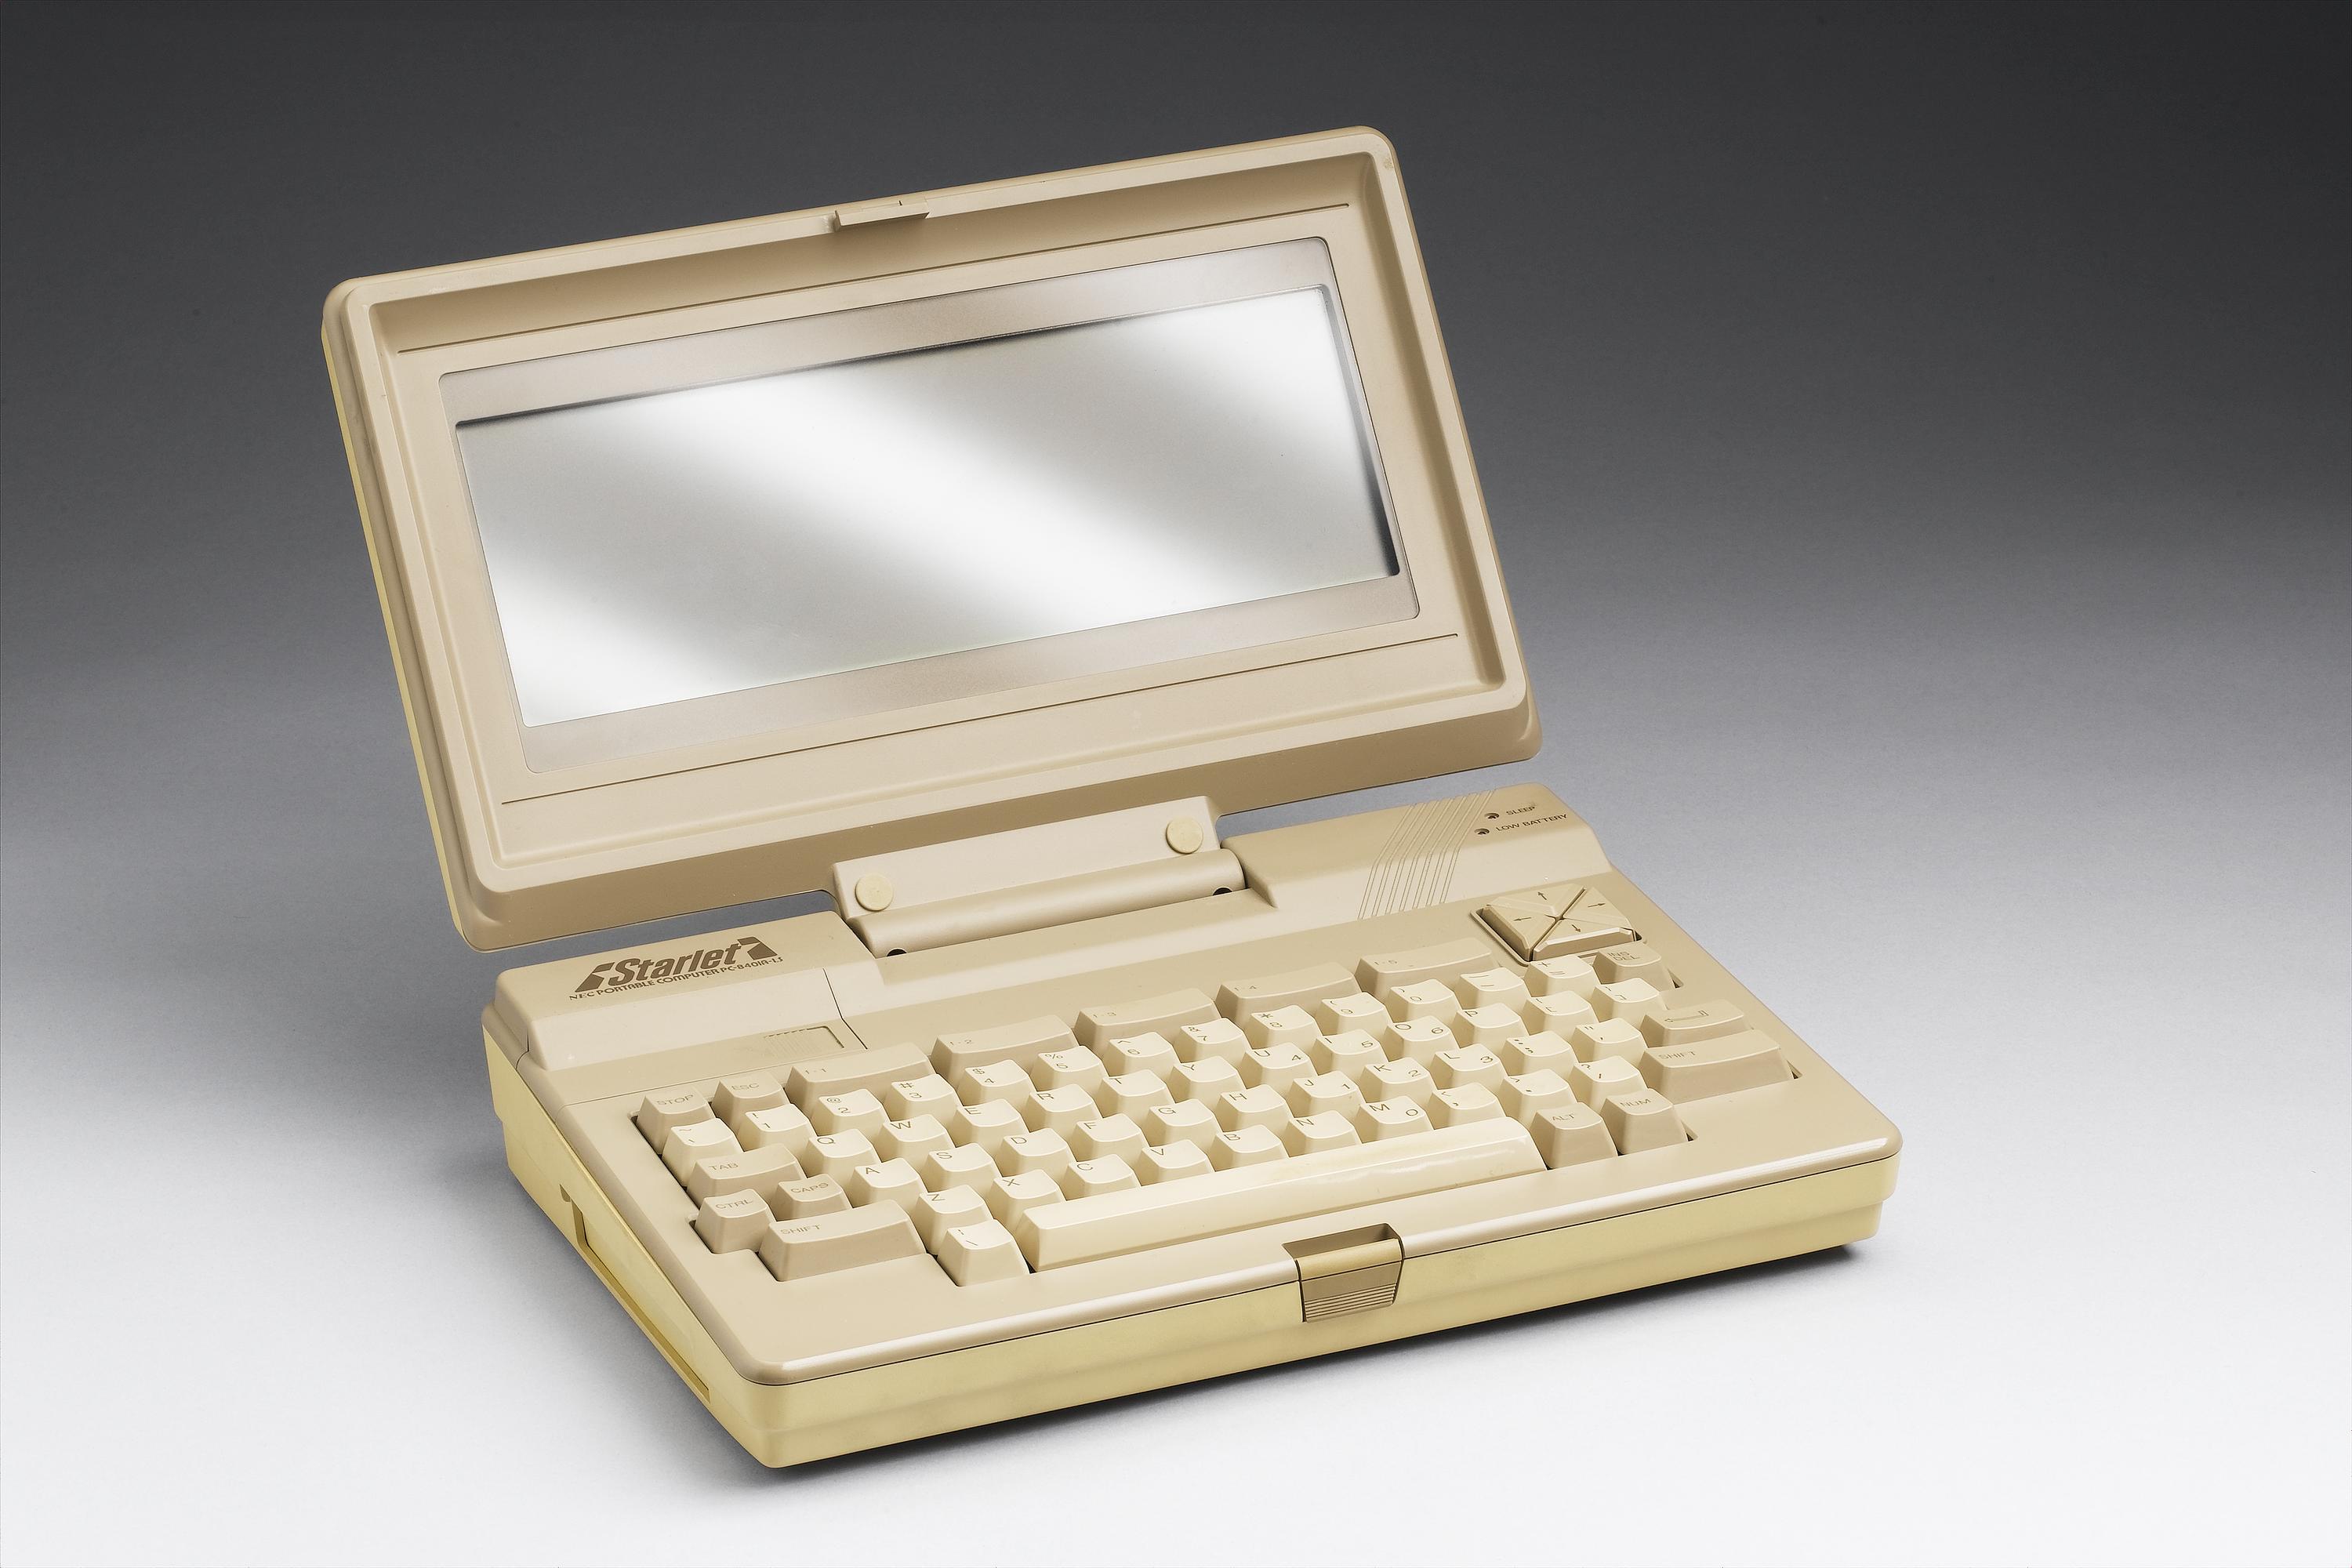 Portable Computer by NEC, model 840 1A "STARLET"